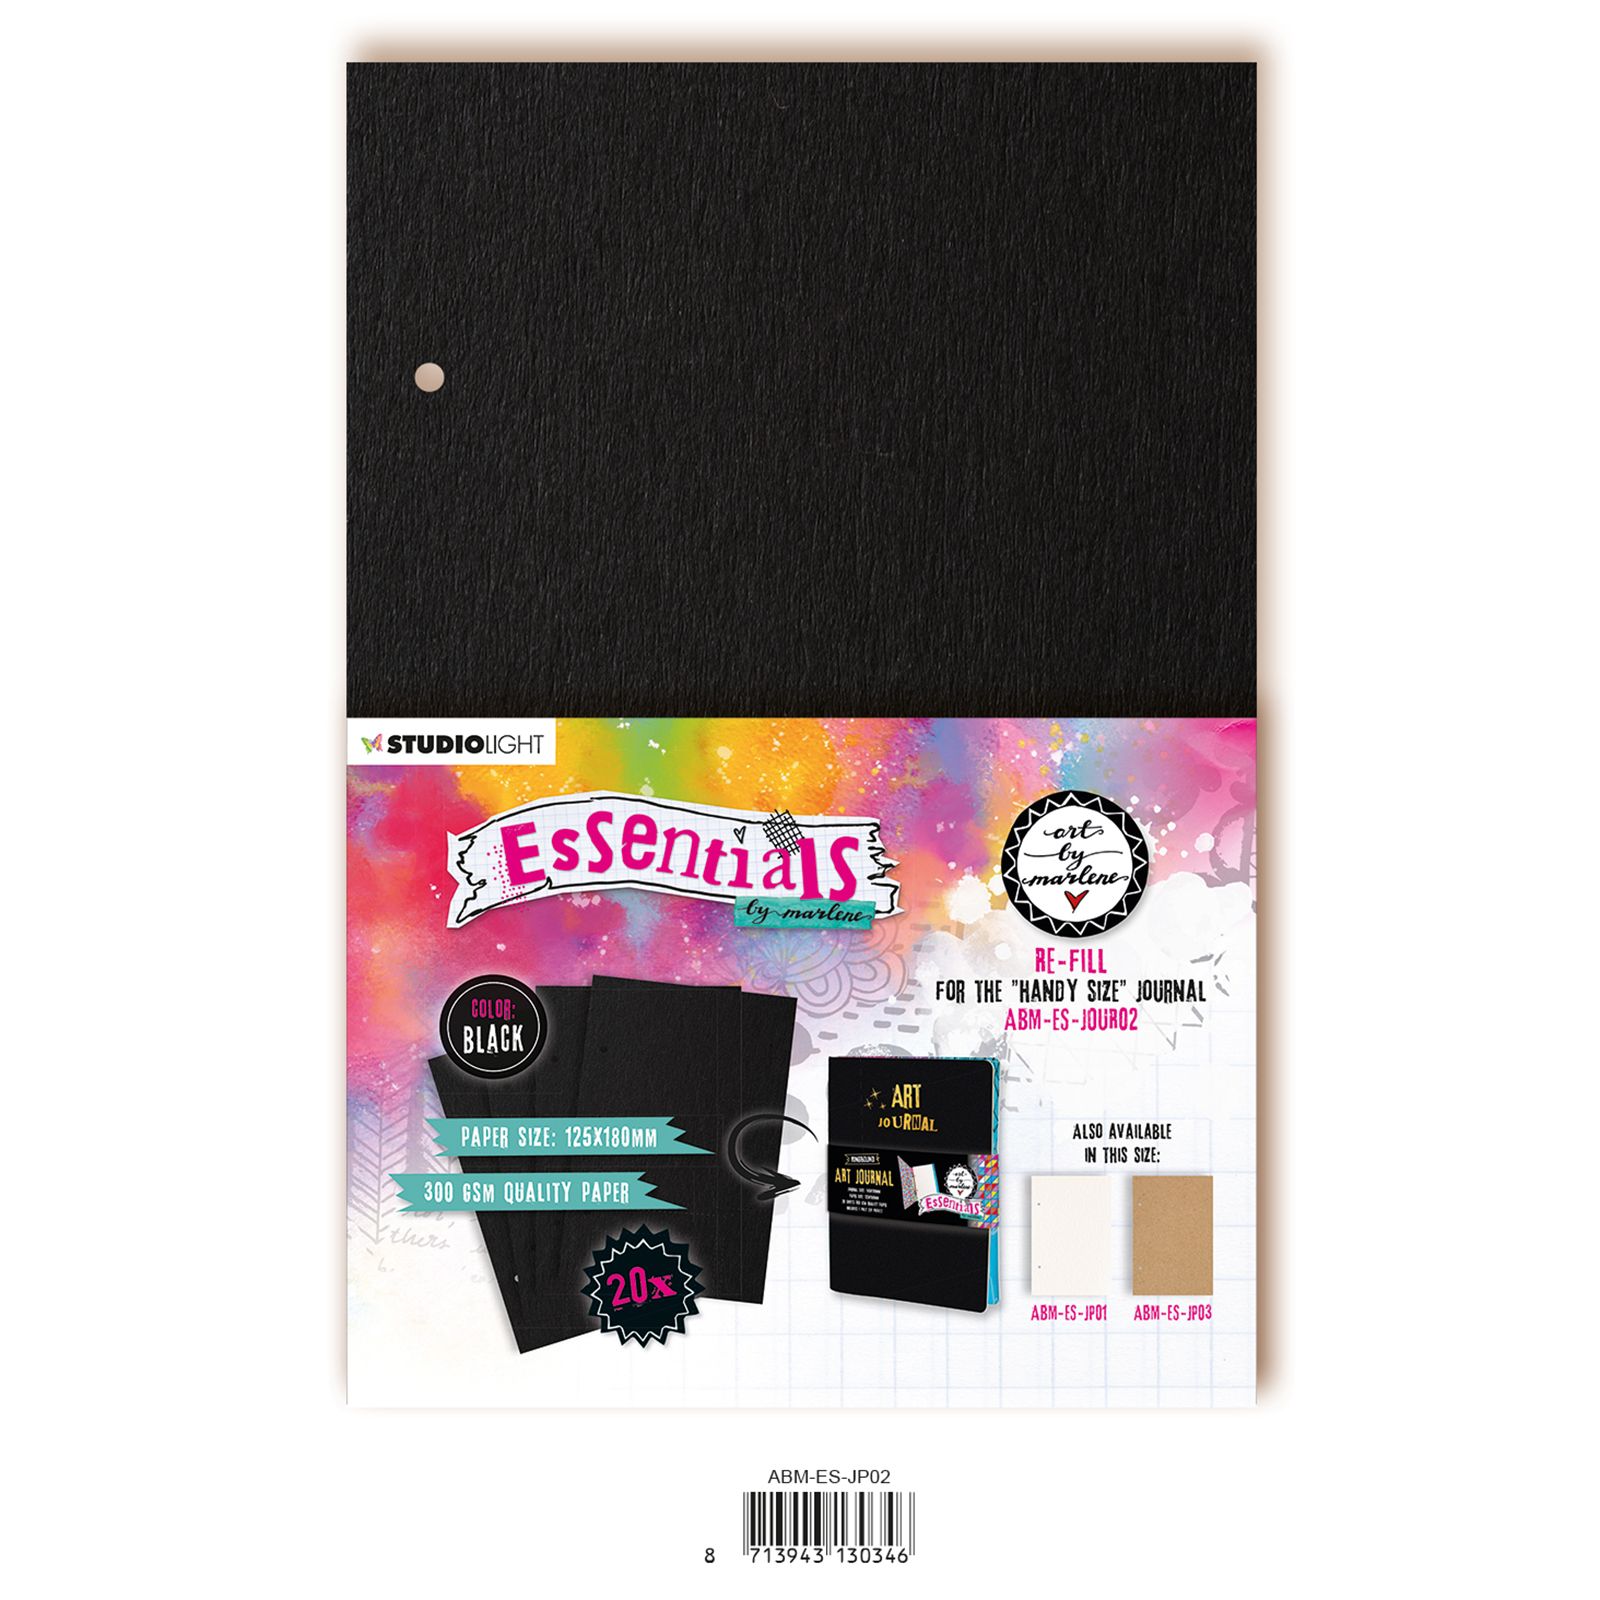 Studio Light • Essentials re-fill for The handy size journal Black